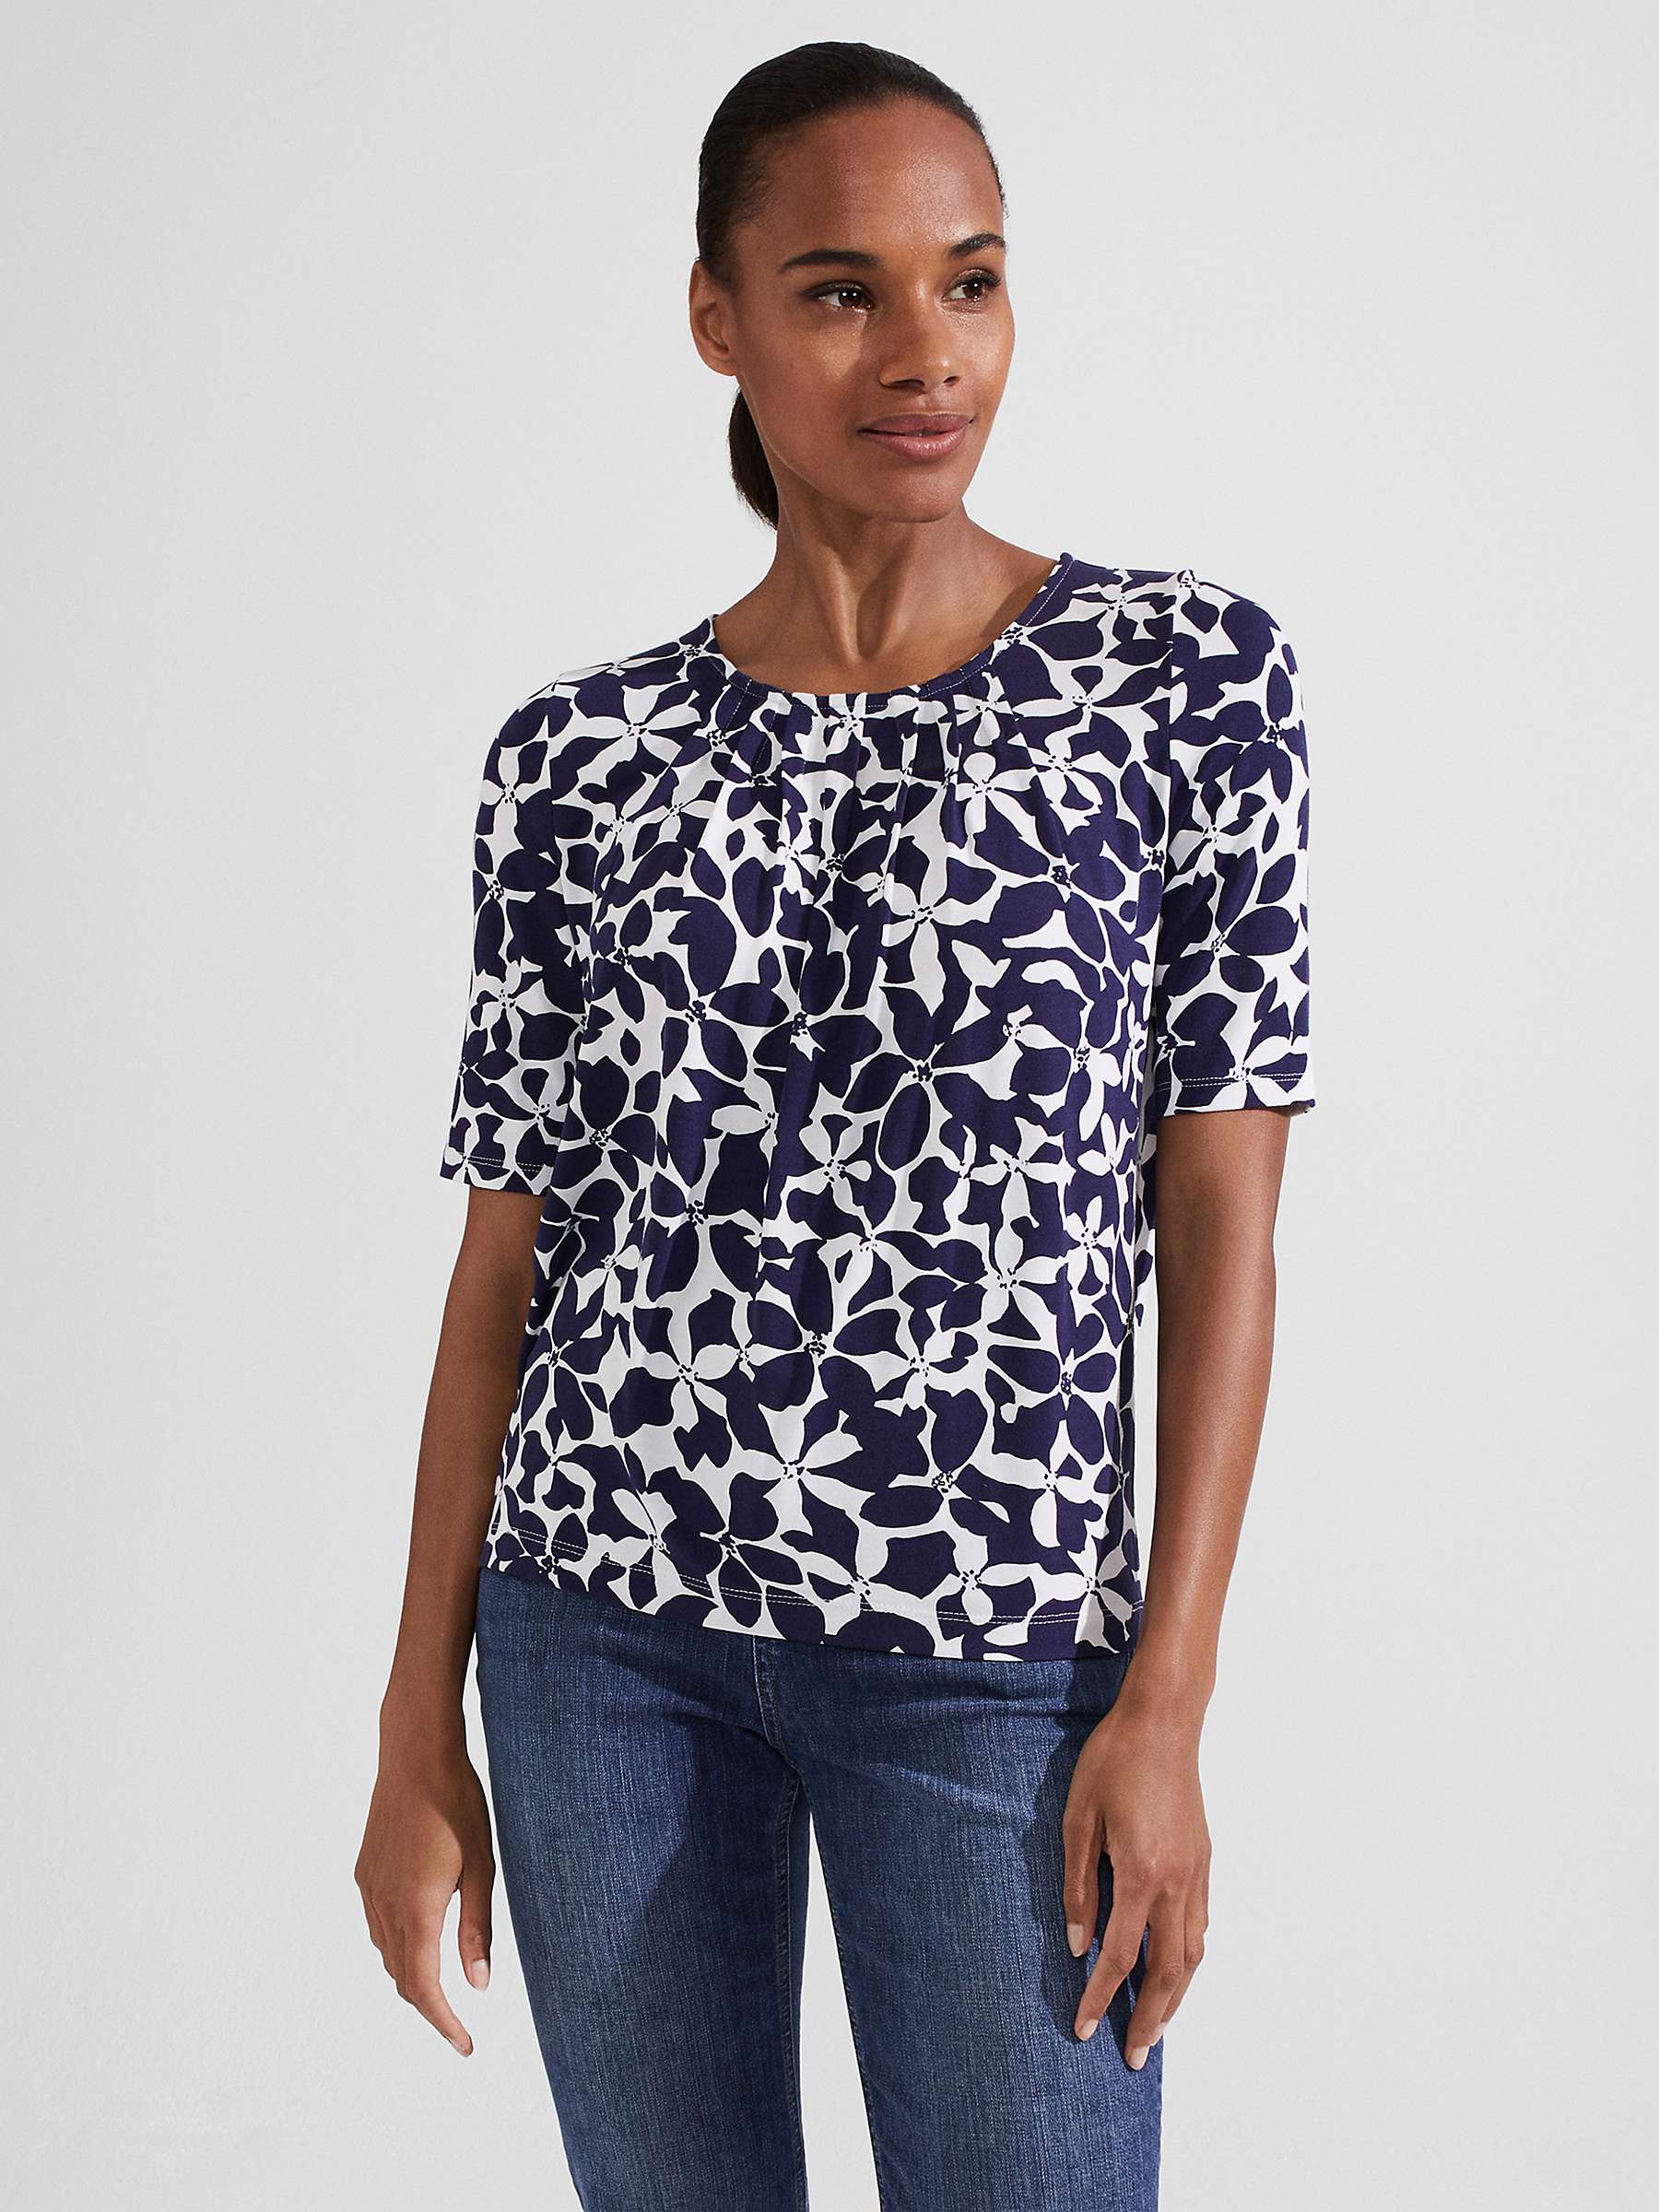 Hobbs Jacqueline Abstract Floral Print Top, Navy/Ivory at John Lewis ...